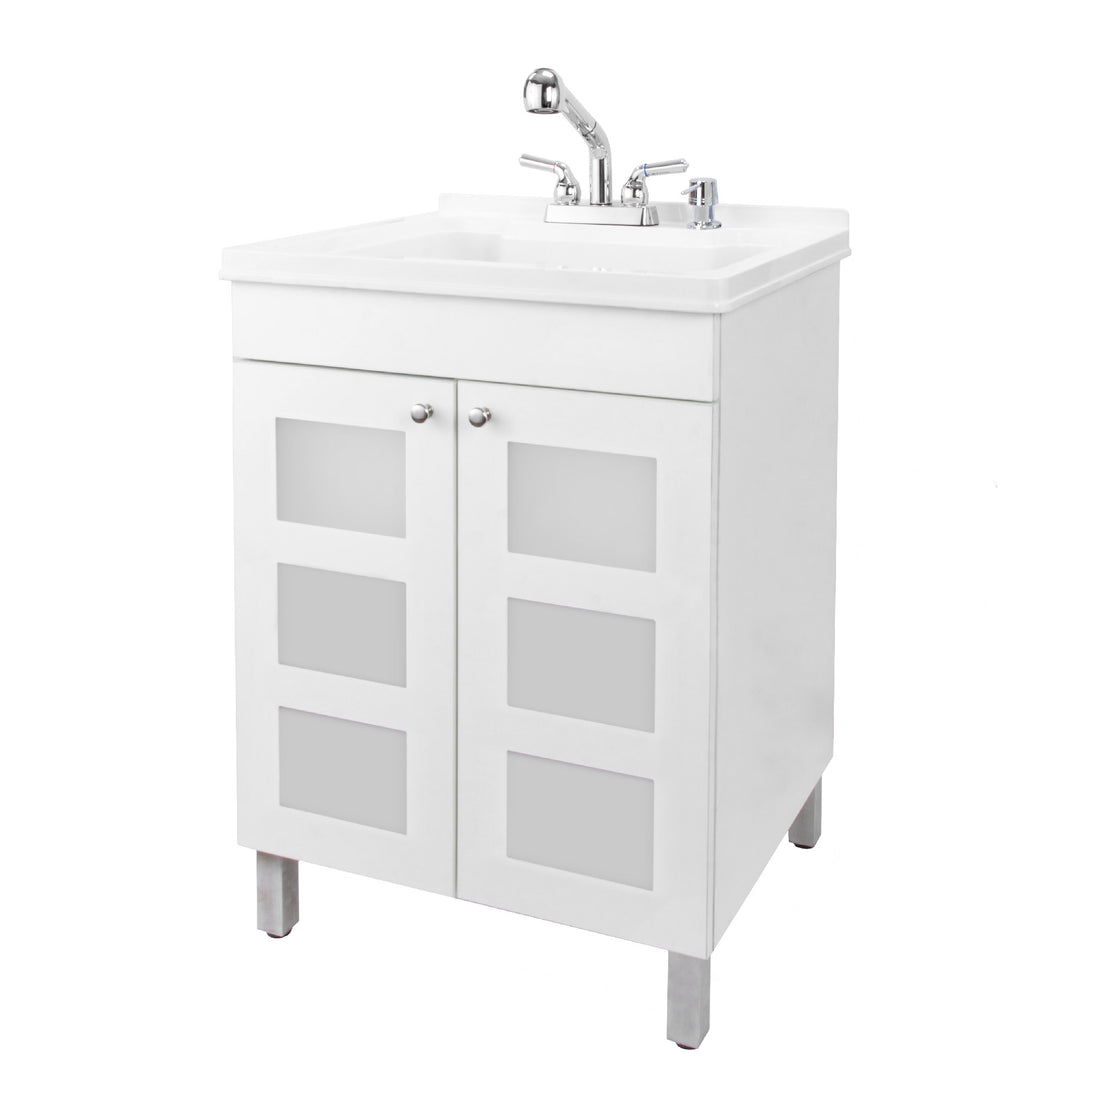 Tehila White Vanity Cabinet and White Utility Sink with Chrome Finish Pull-Out Faucet - Utility sinks vanites Tehila